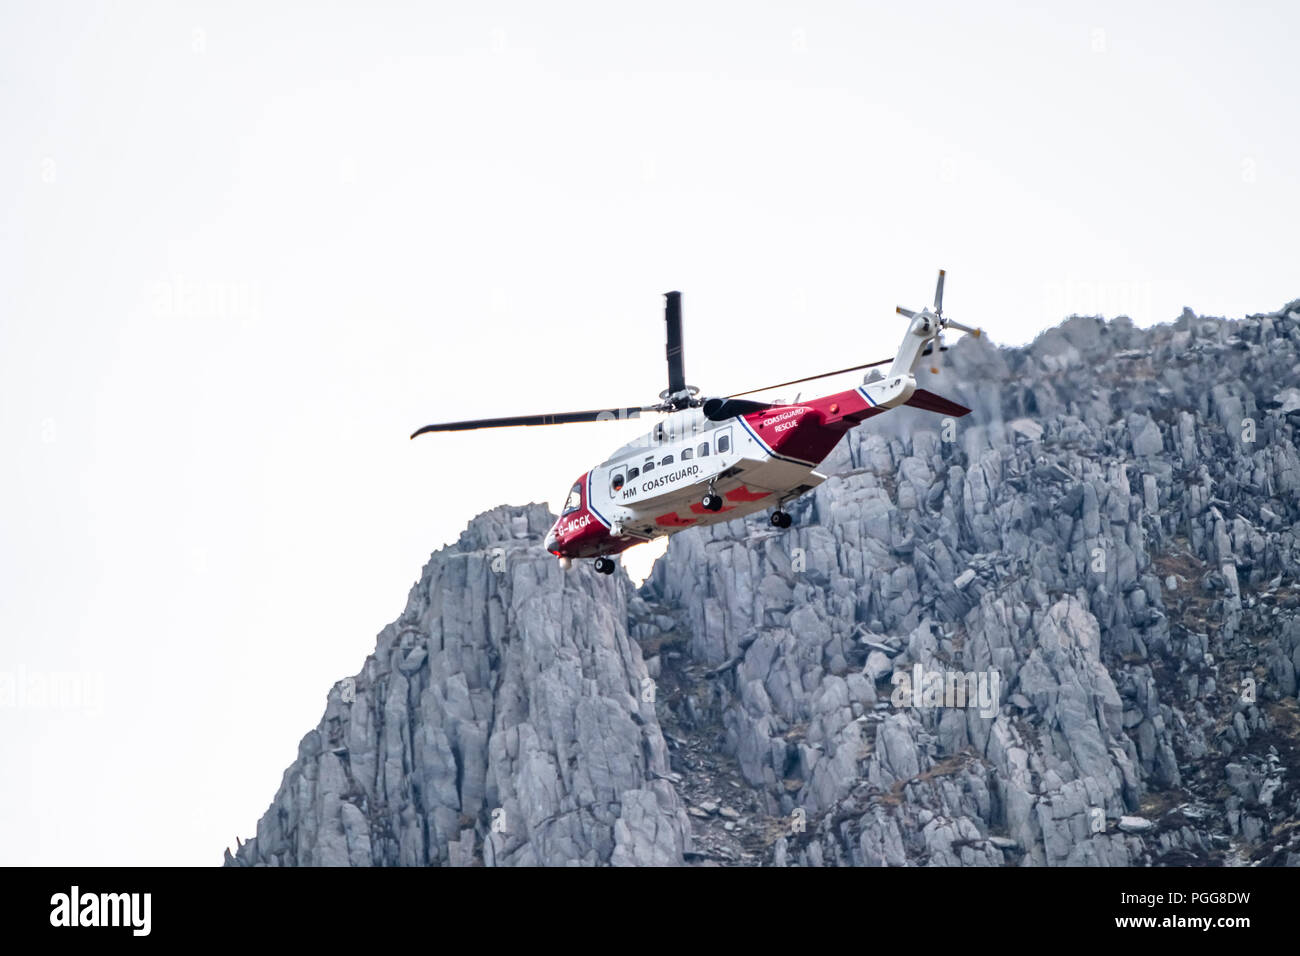 OGWEN GLEN / WALES - APRIL 29 2018 : British HM Coastguard helicopter Sikorsky S-92 operated by Bristow Helicopters conducting a rescue exercise at Og Stock Photo